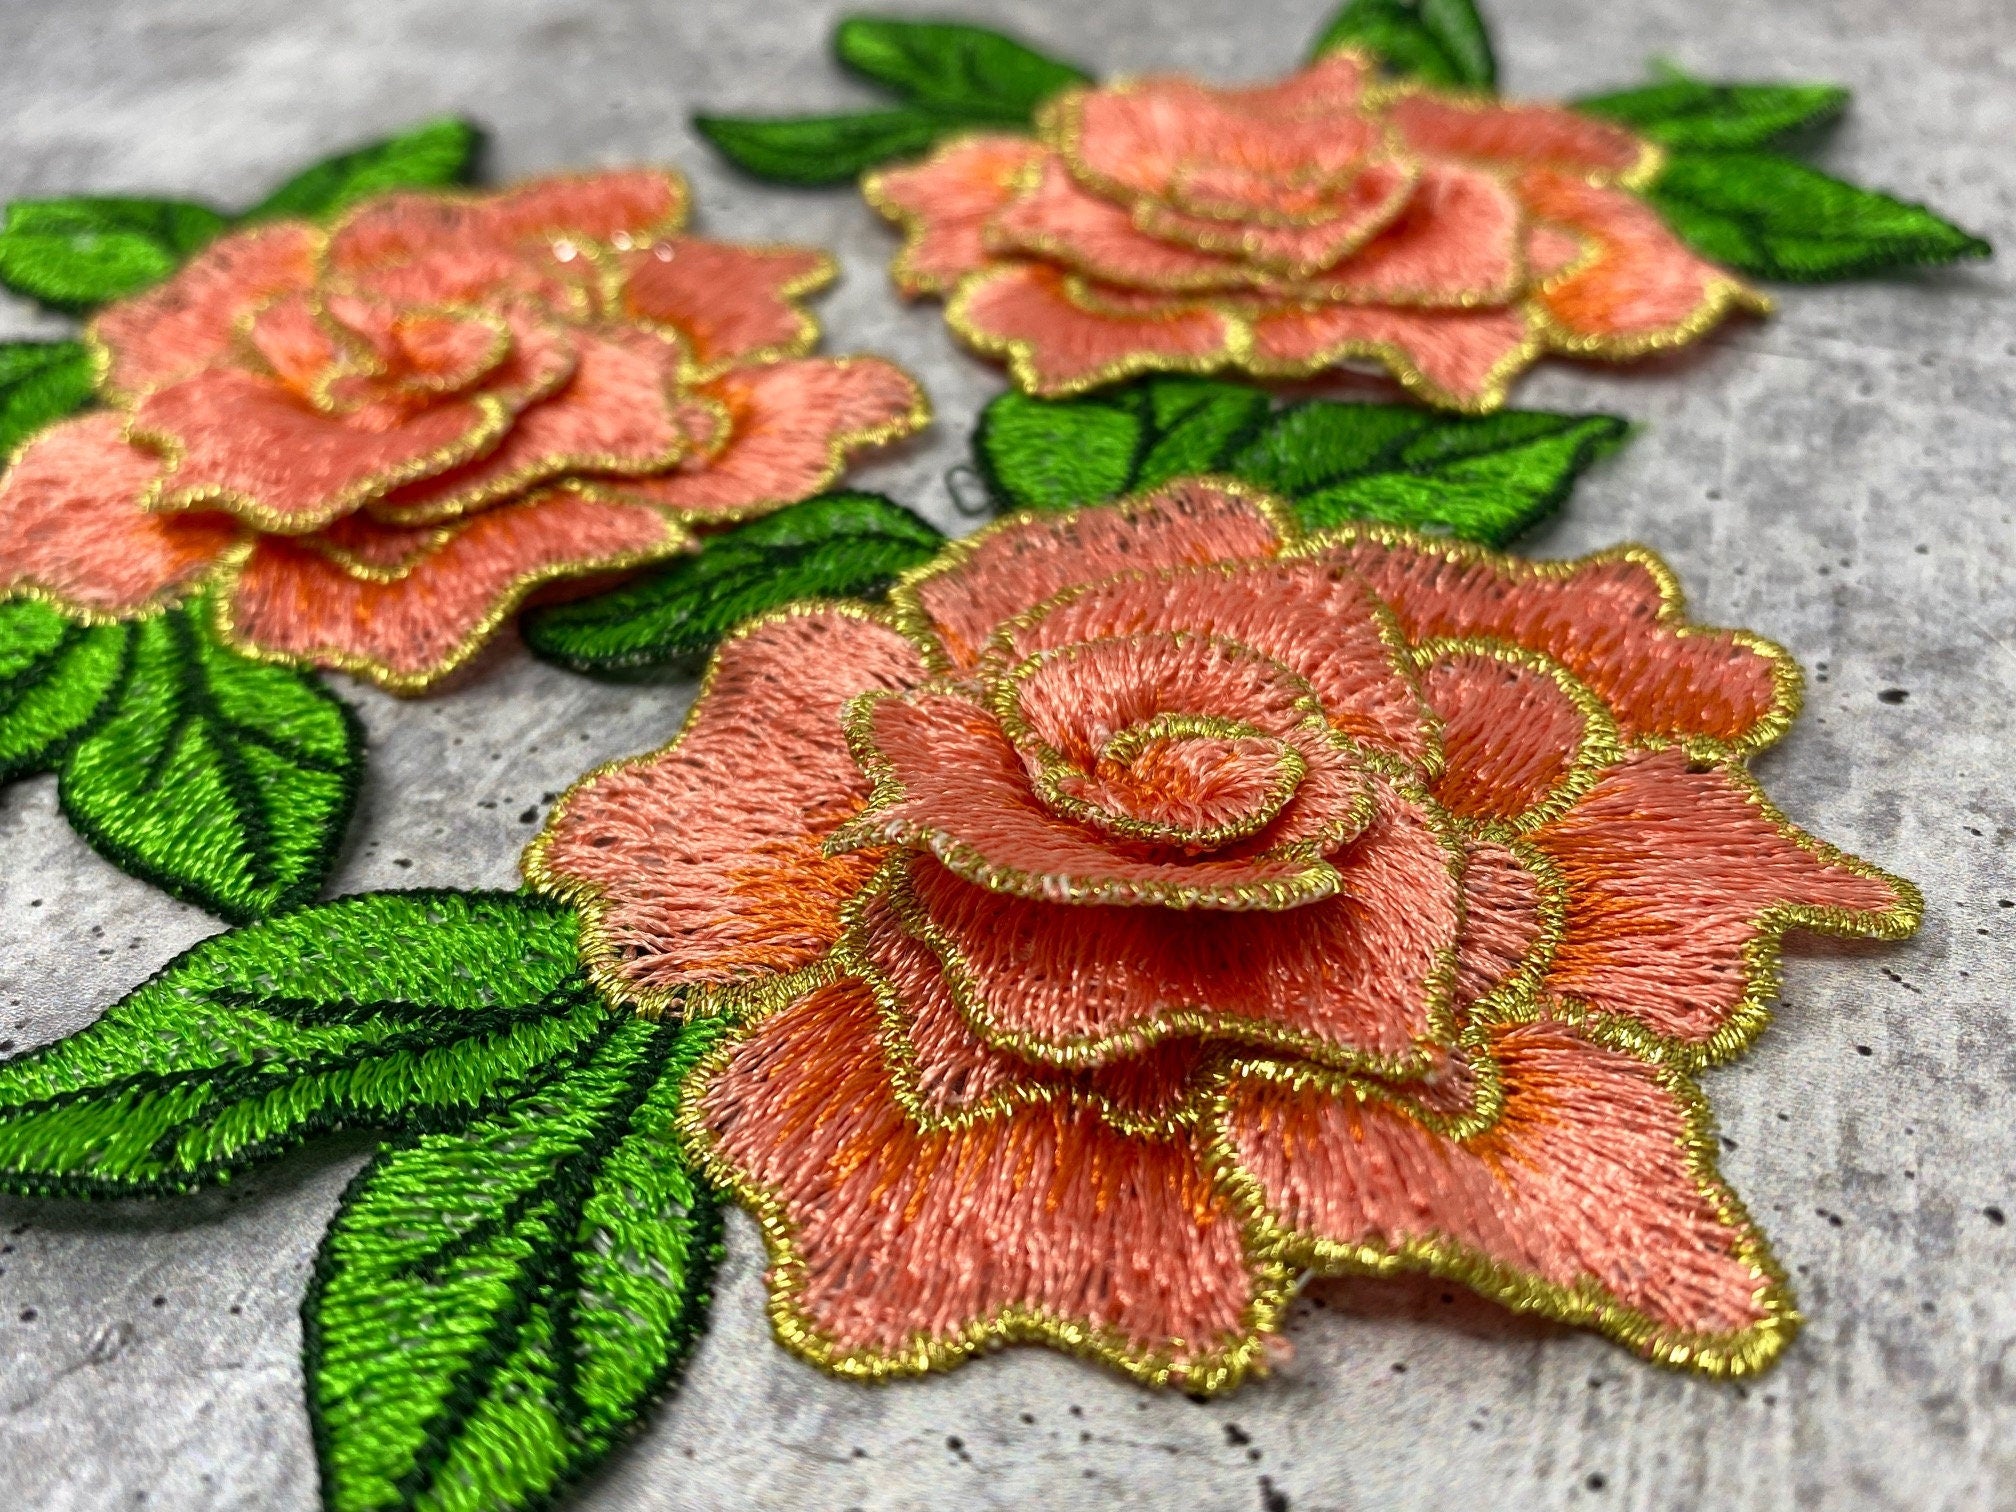 NEW, 2 pc set, Peach & Gold Roses (size 4-inches), matching lace sew-on  floral patches (2 pcs),Flower Patches, Rose Lace Patches